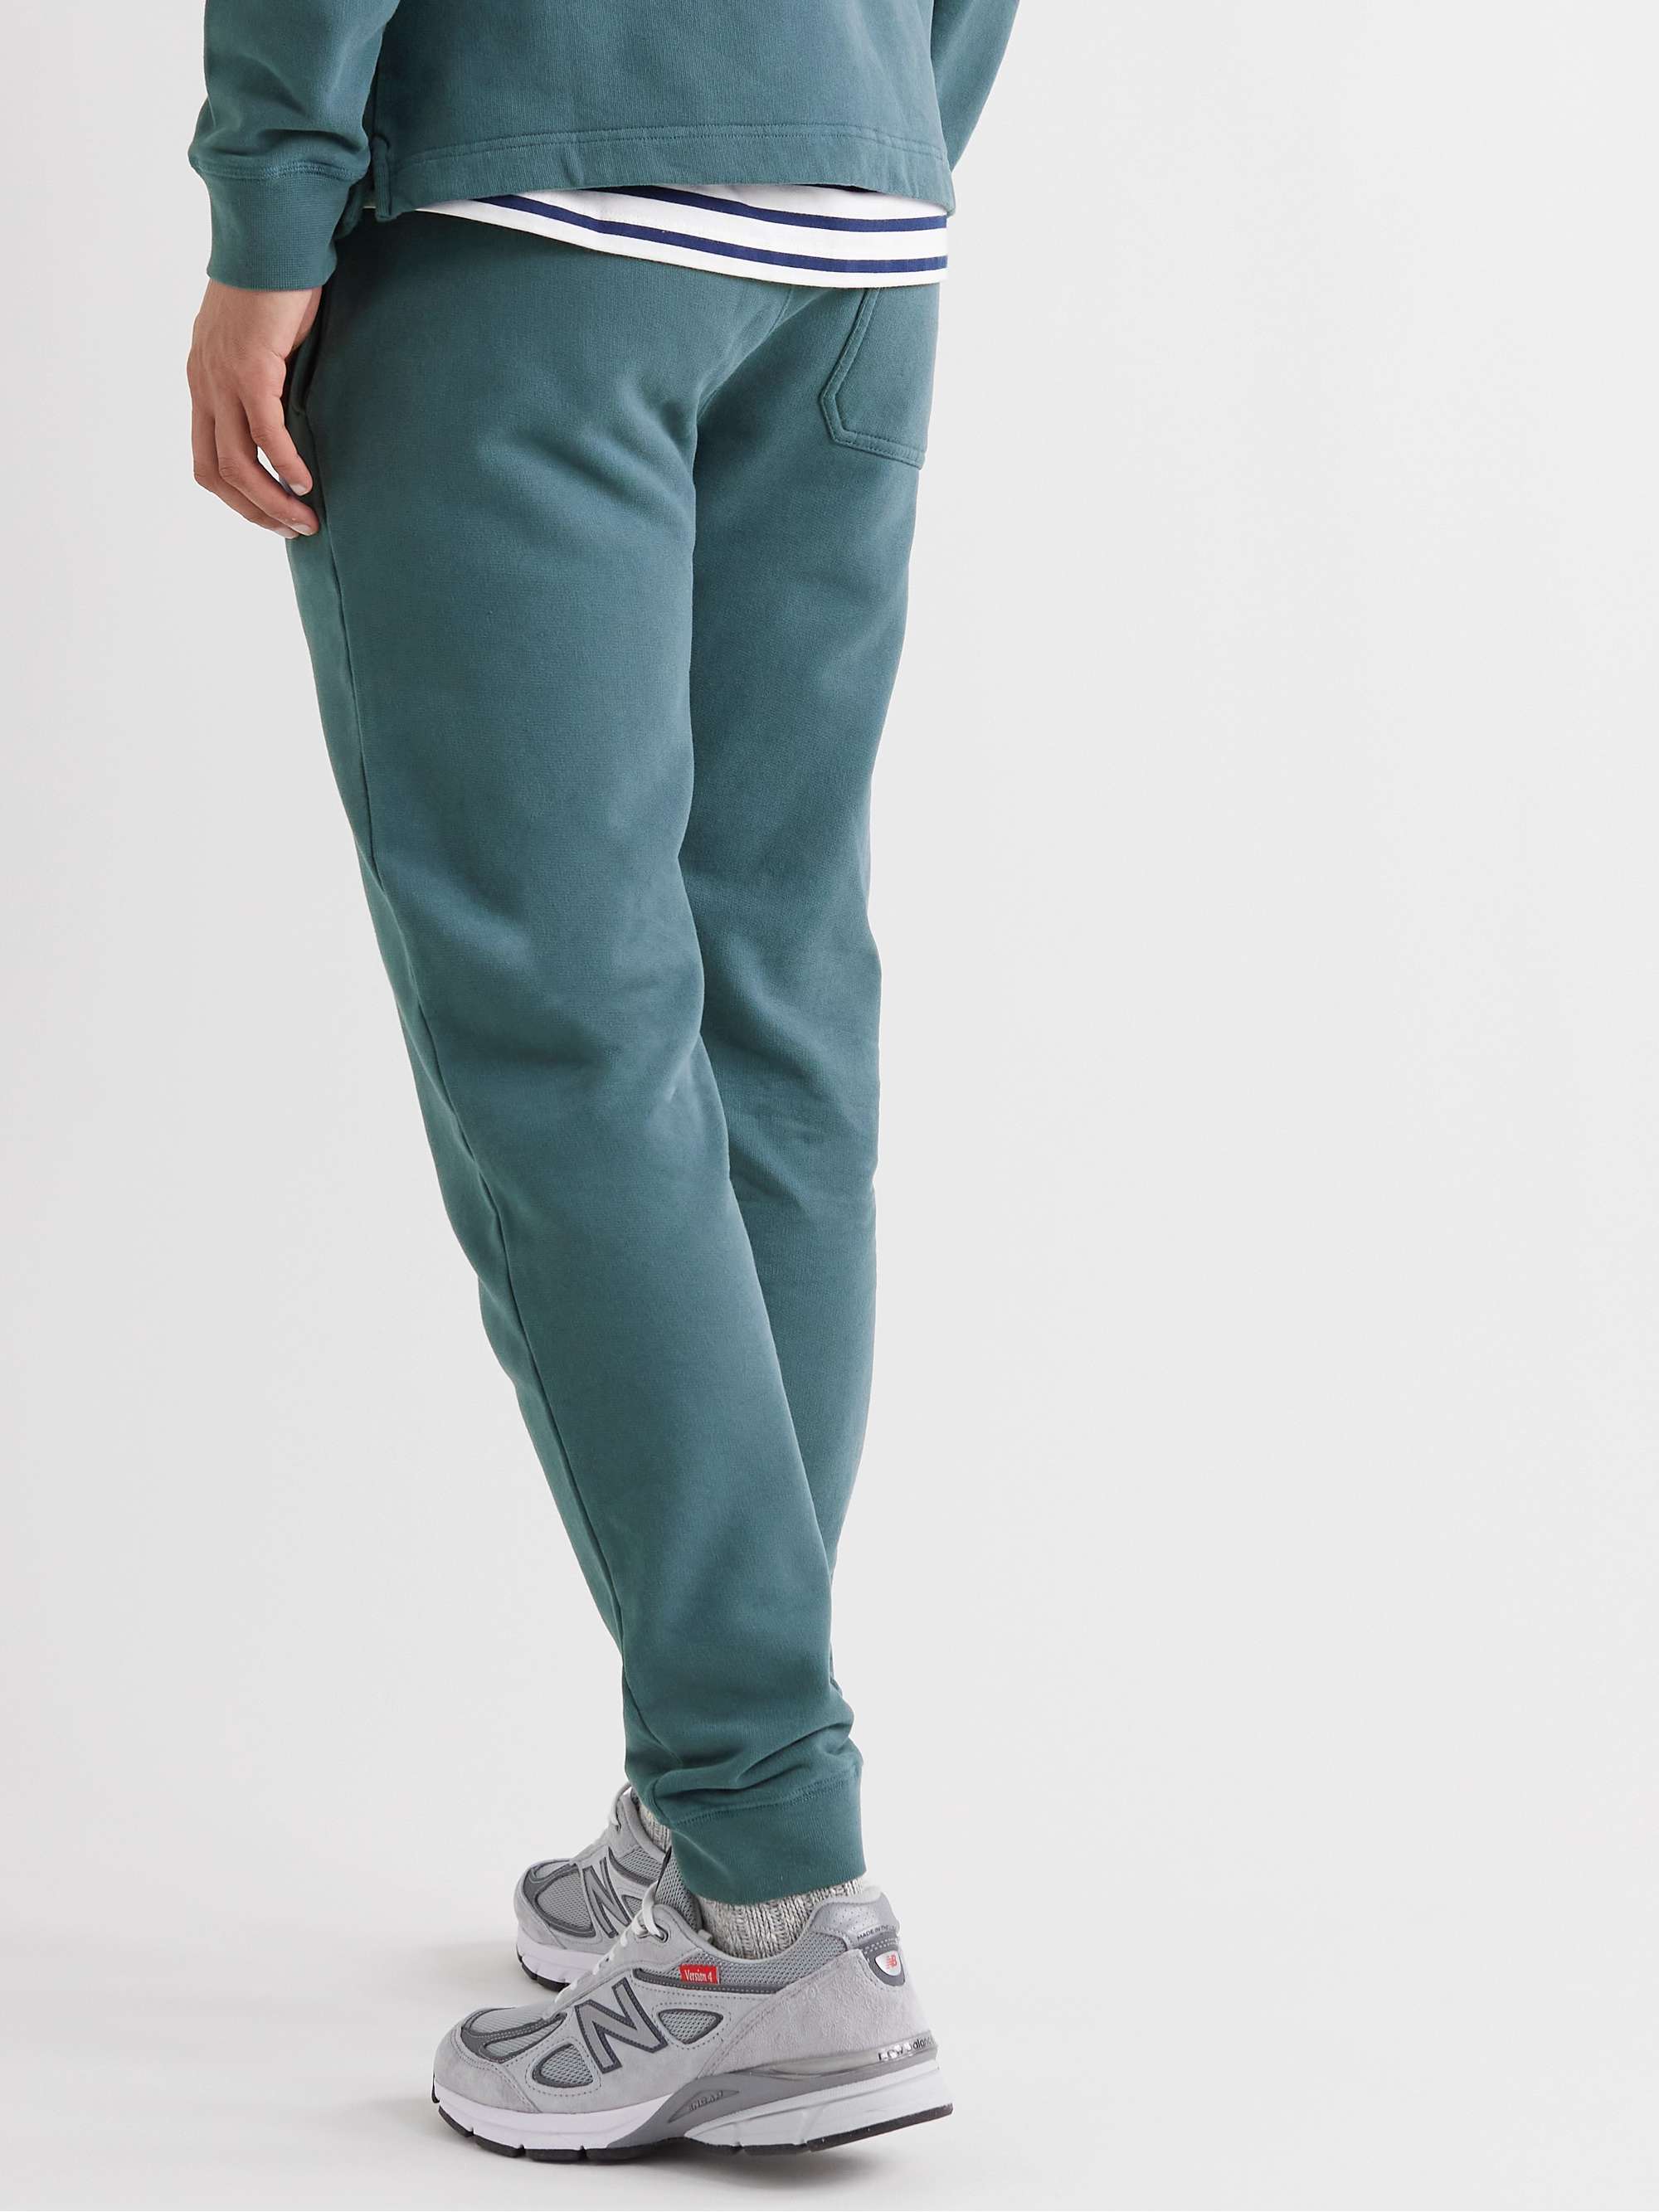 SUNSPEL Tapered Brushed Loopback Cotton-Jersey Sweatpants